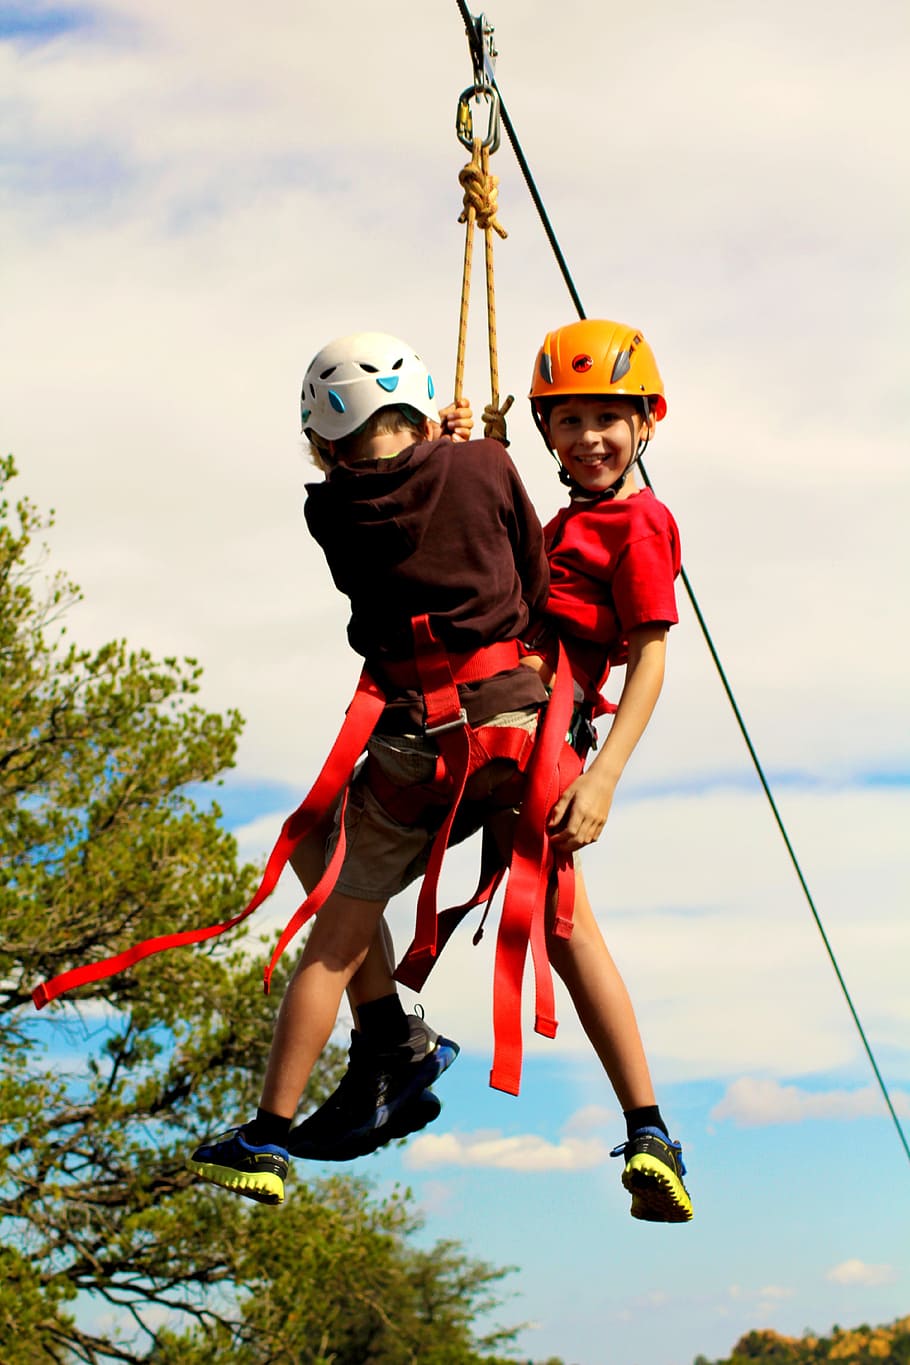 HD wallpaper: two boys hanging on cable, zip line, children, kids, climbing  | Wallpaper Flare